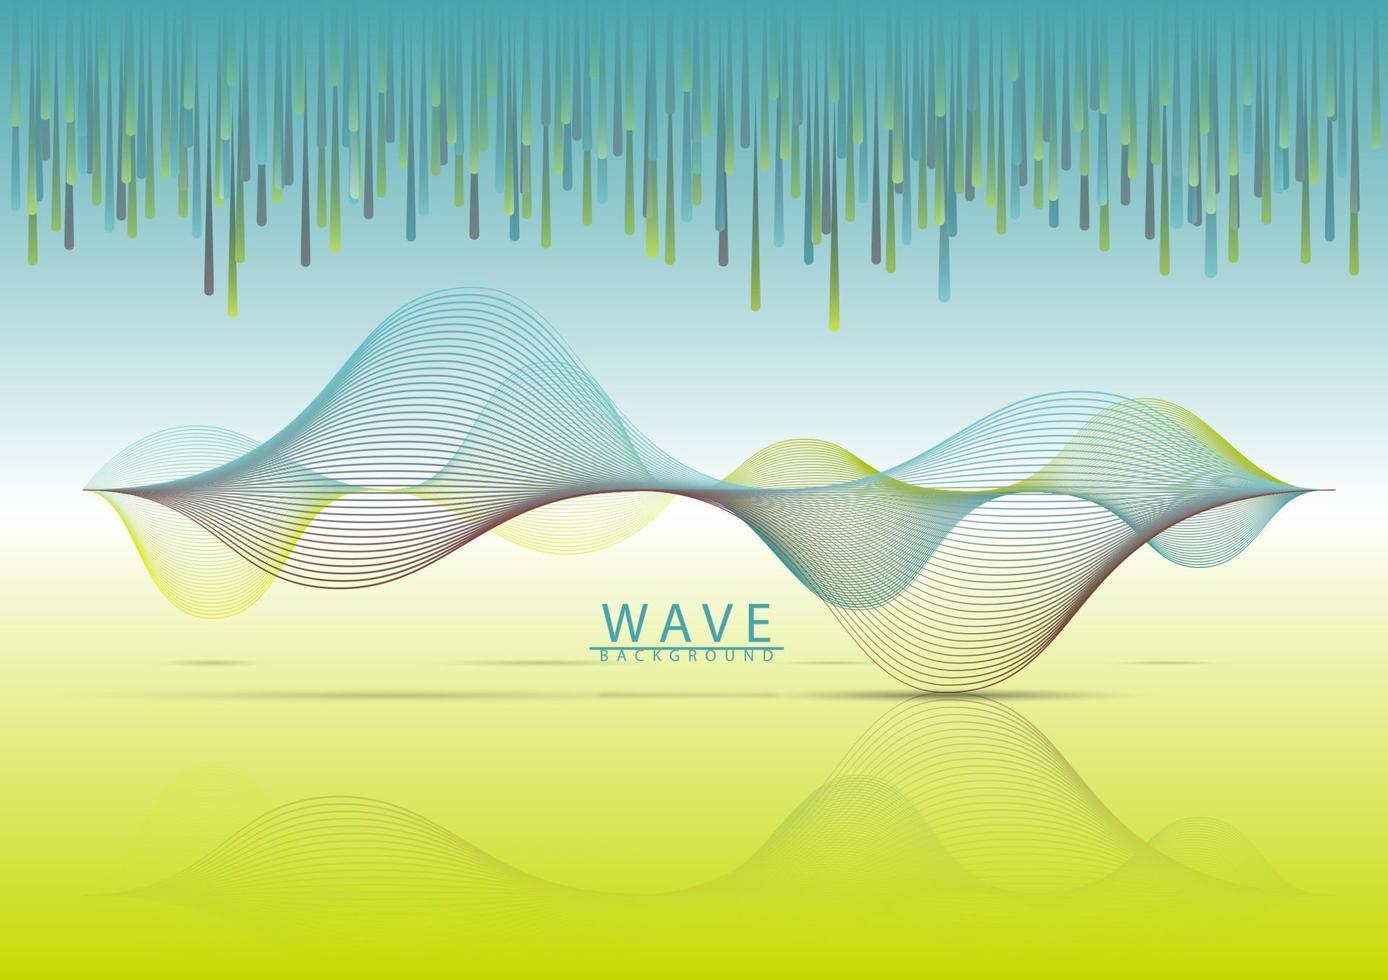 Curved smooth tape Design, Wave of colored lines, Abstract Background. vector illustration.